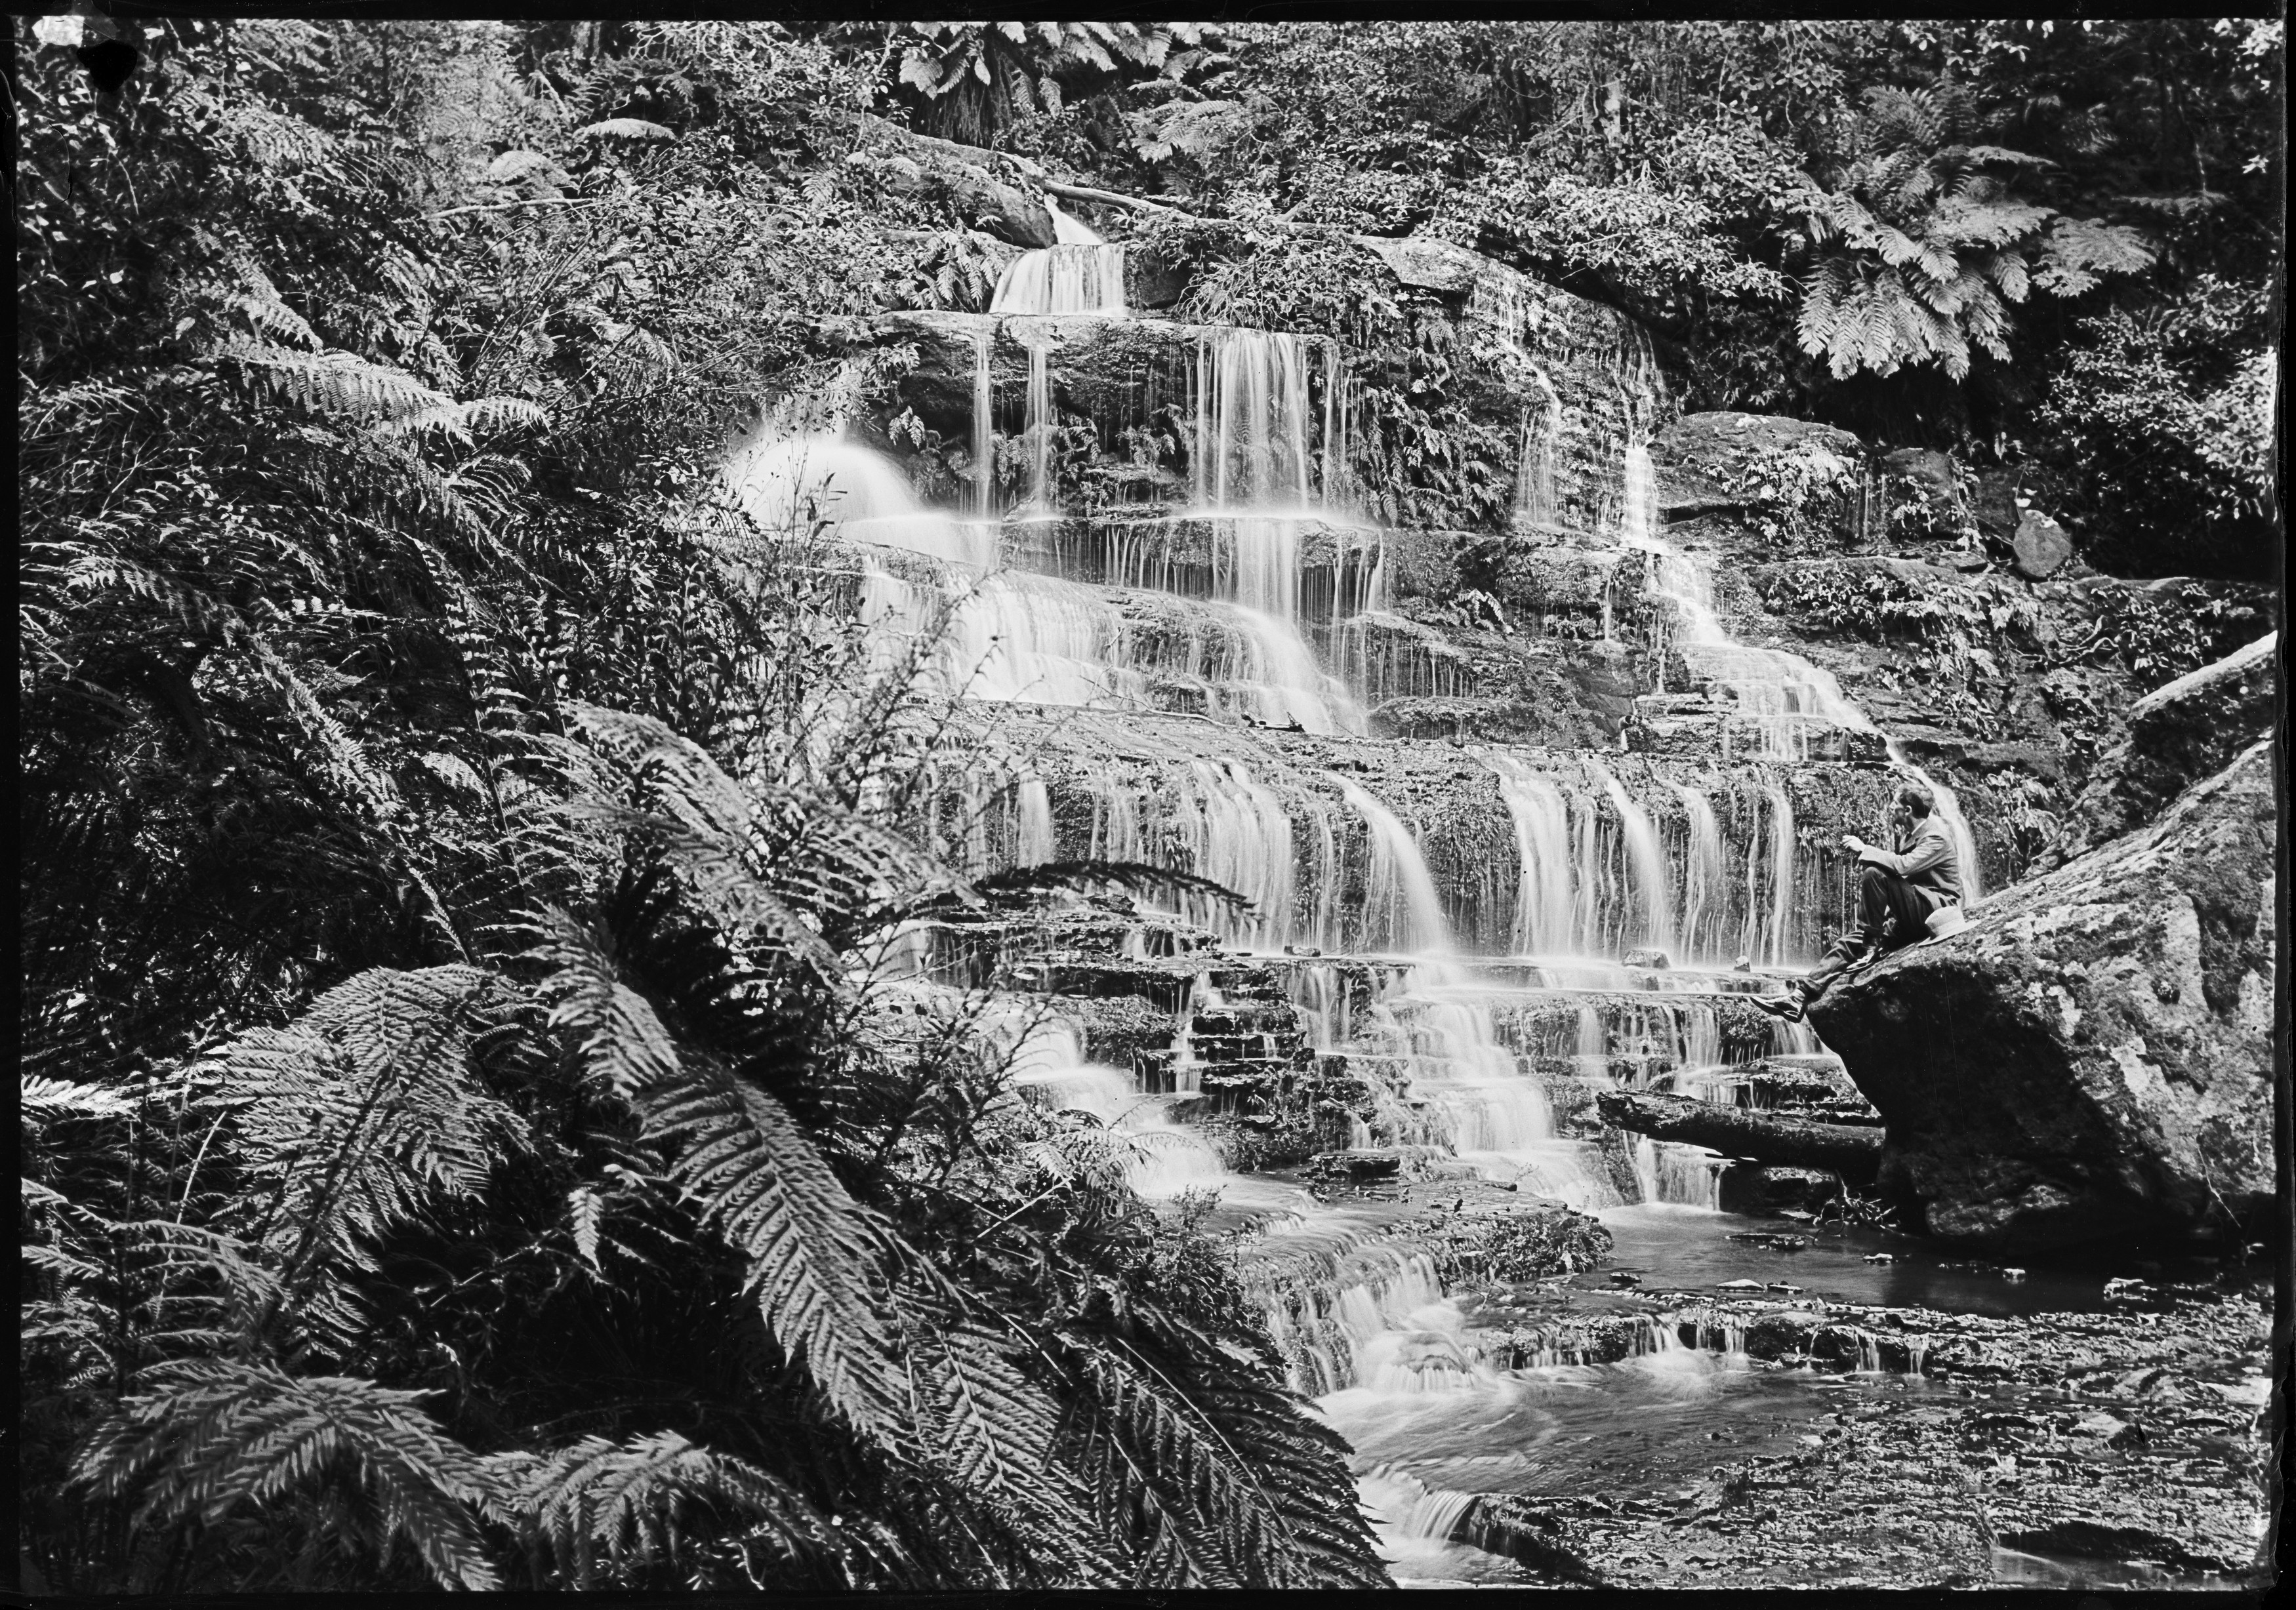 Black and white photograph of a cascading waterfall. A man sits on a rock in the foreground.